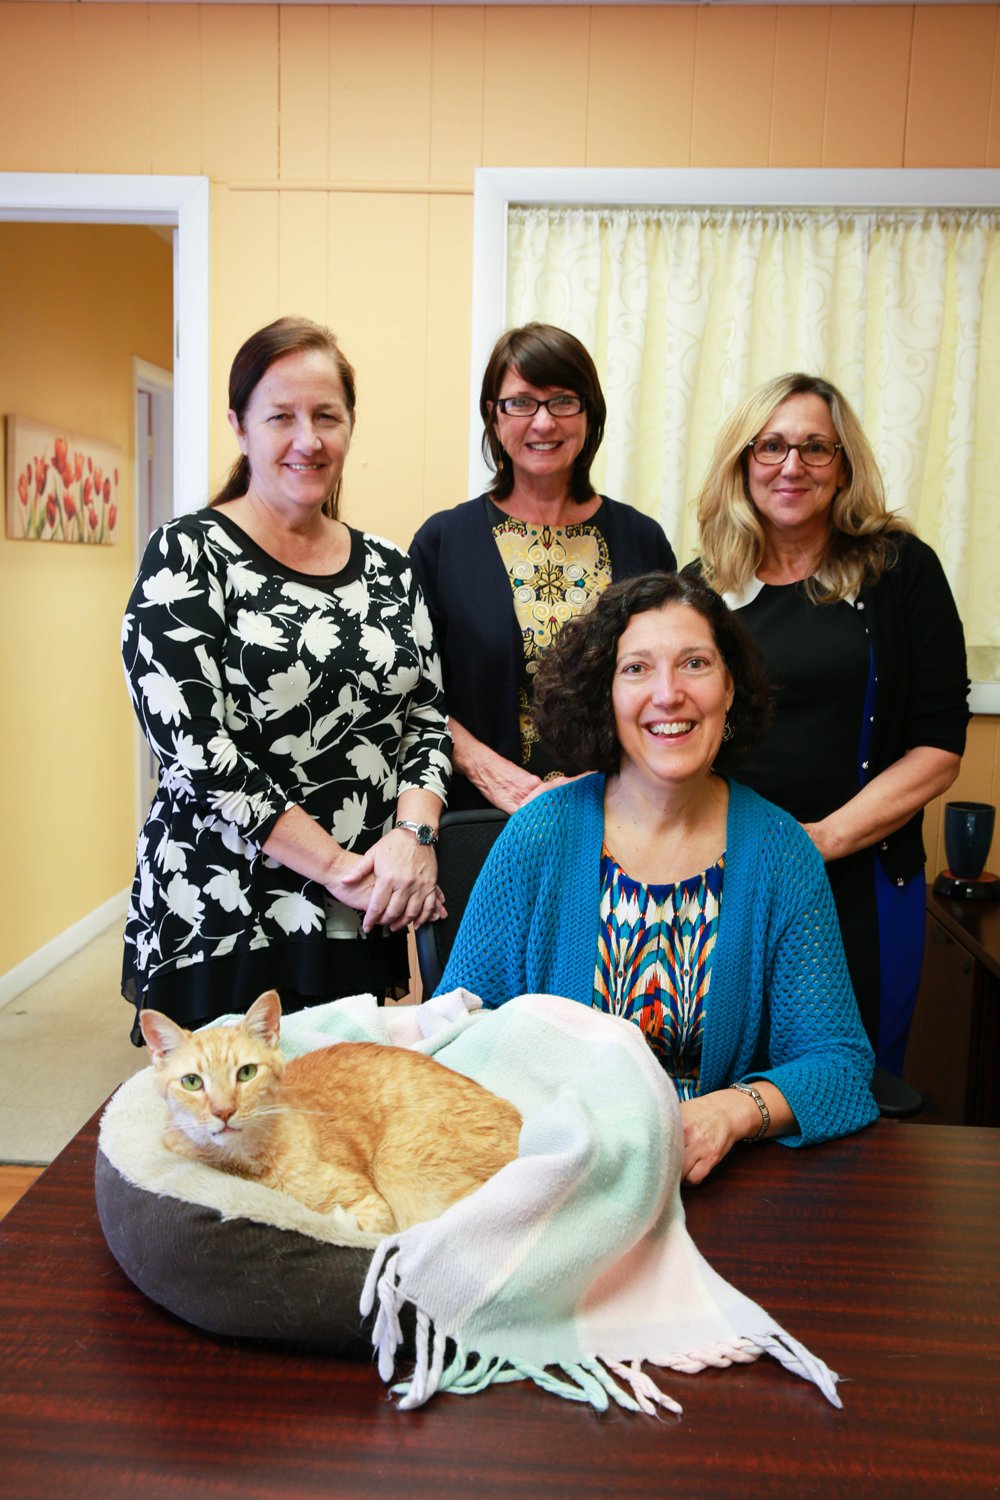 Top, From left to right: Susan Bauer (Office Manager and Probate Paralegal), Patricia Hagood (Client Services Coordinator), and Diane Dougherty (Client Services Manager). Seated in front, Stephanie Edwards (Attorney), and Winston (Client Friend / up-and-coming Model). Photo by Emily Canfield.